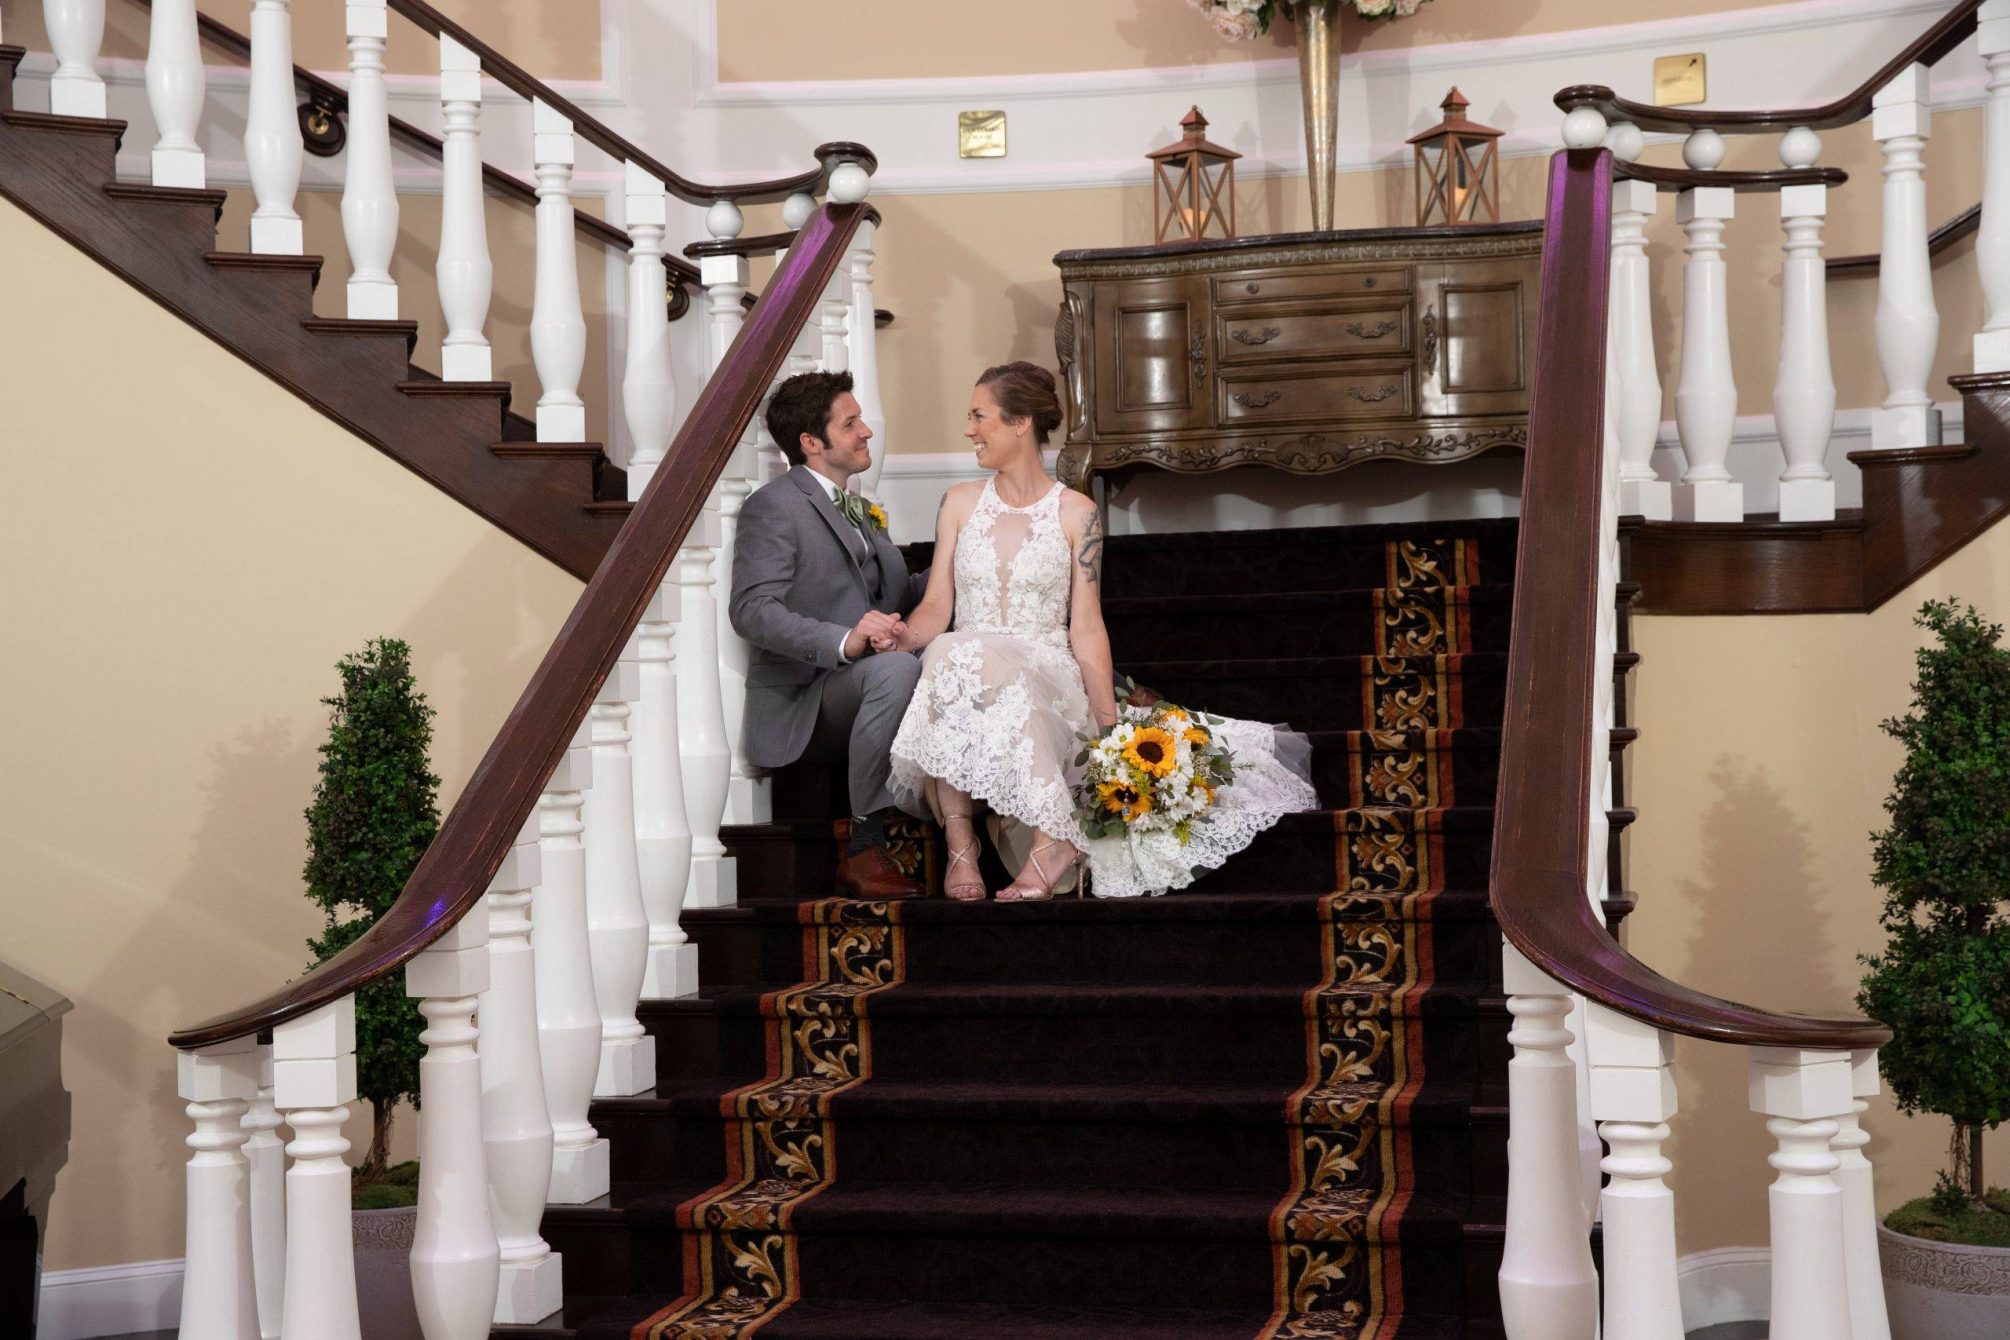 Bridgewater Manor bride and groom relax on staircase